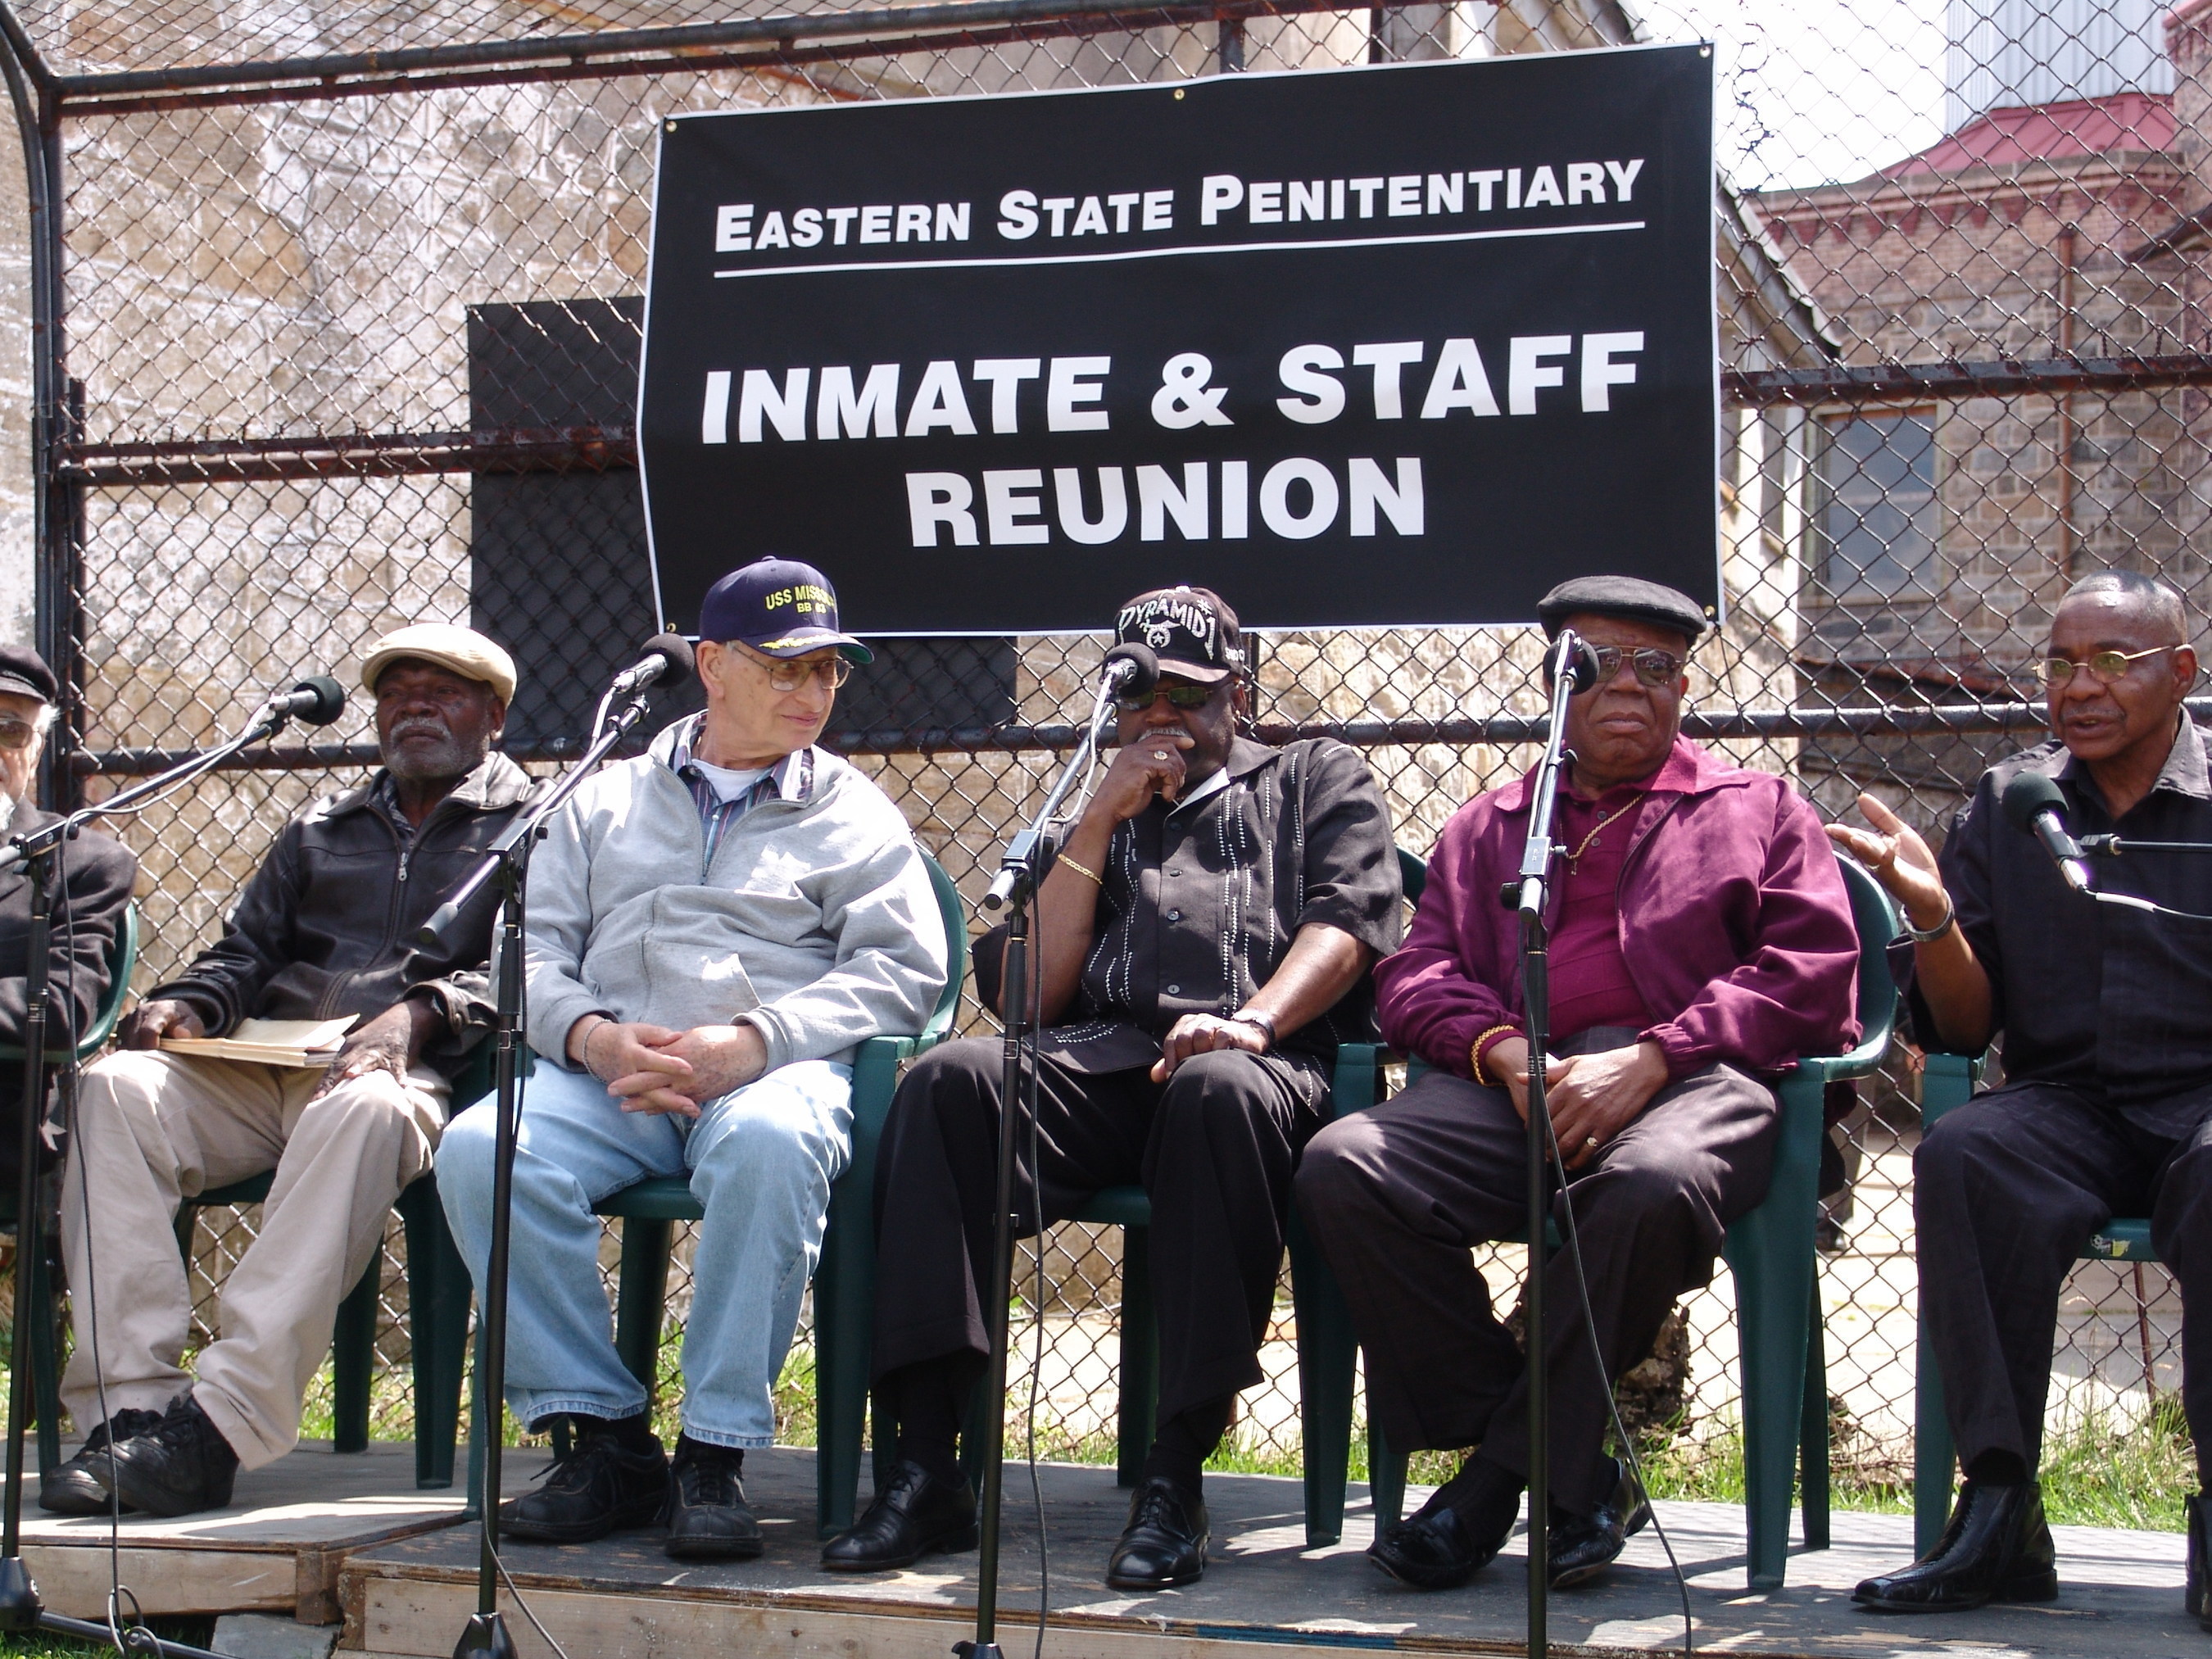 Former inmates and officers return to the abandoned cellblocks of Eastern State Penitentiary to share their memories with the public on Saturday, May 9, 2015.